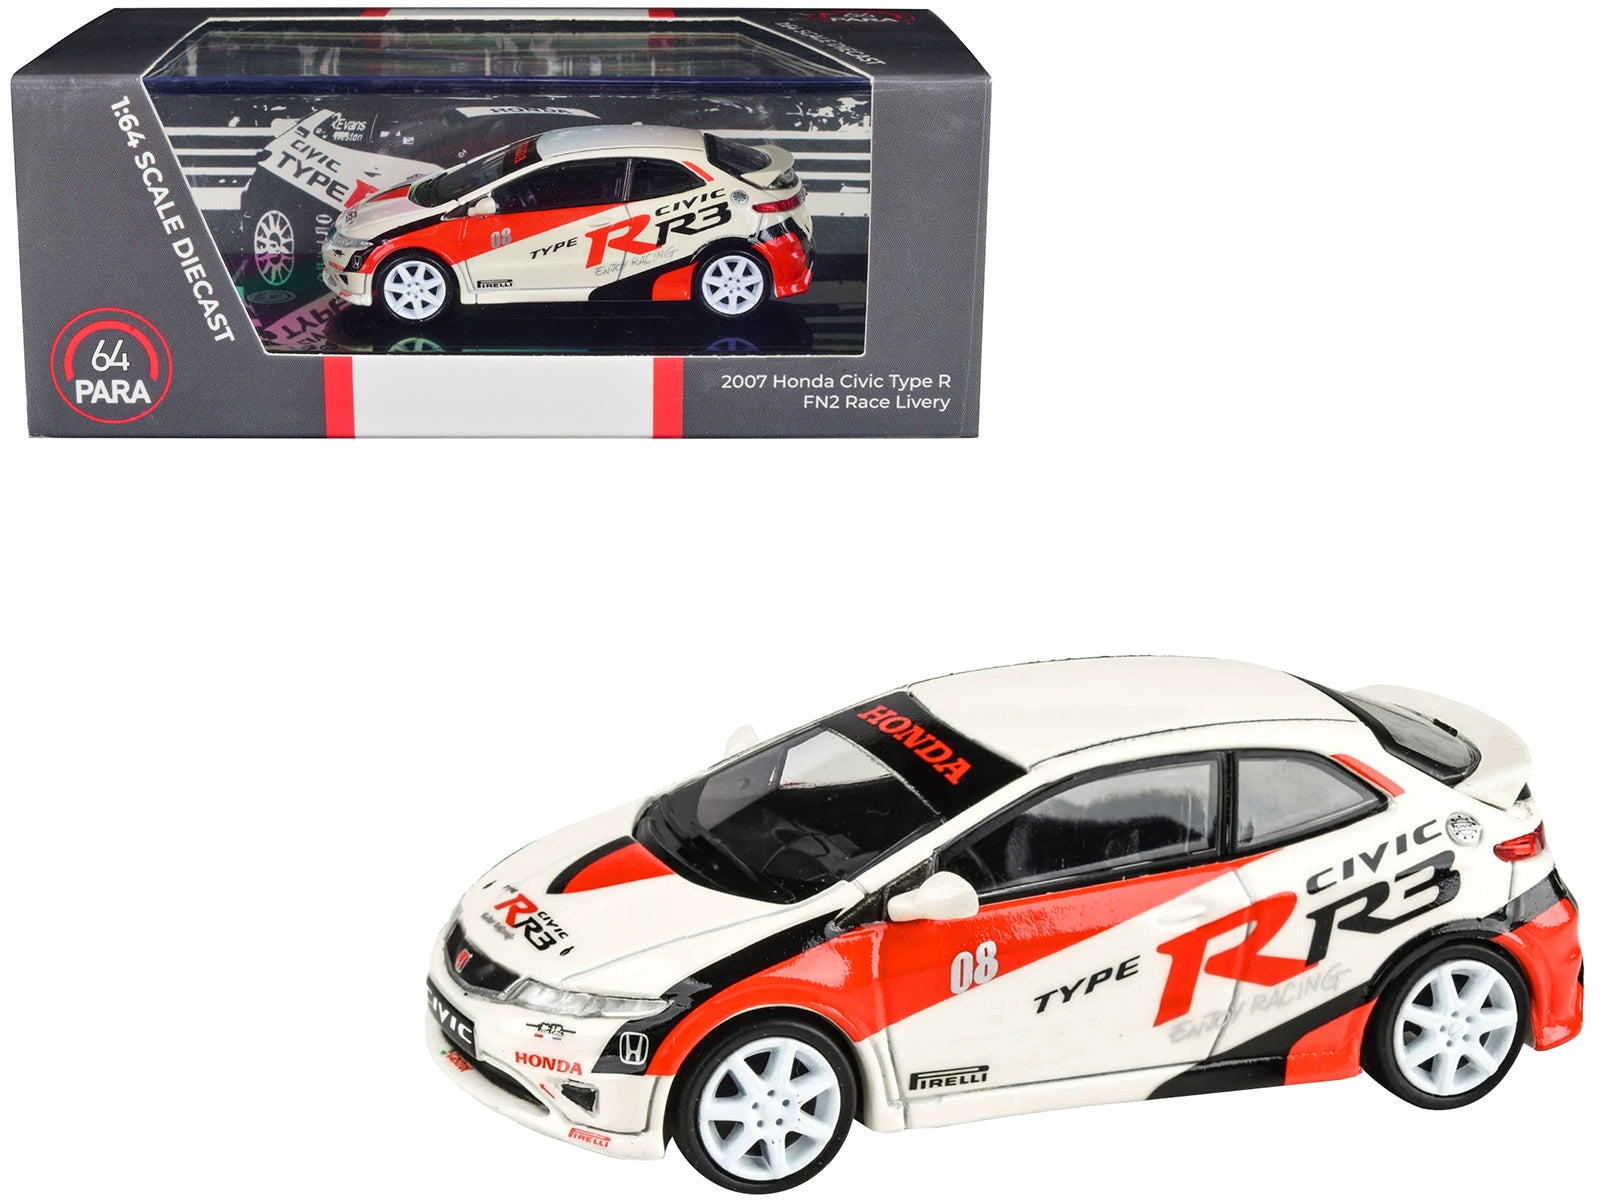 2007 Honda Civic Type R FN2 White "Race Livery" 1/64 Diecast Model Car by Paragon Models Paragon